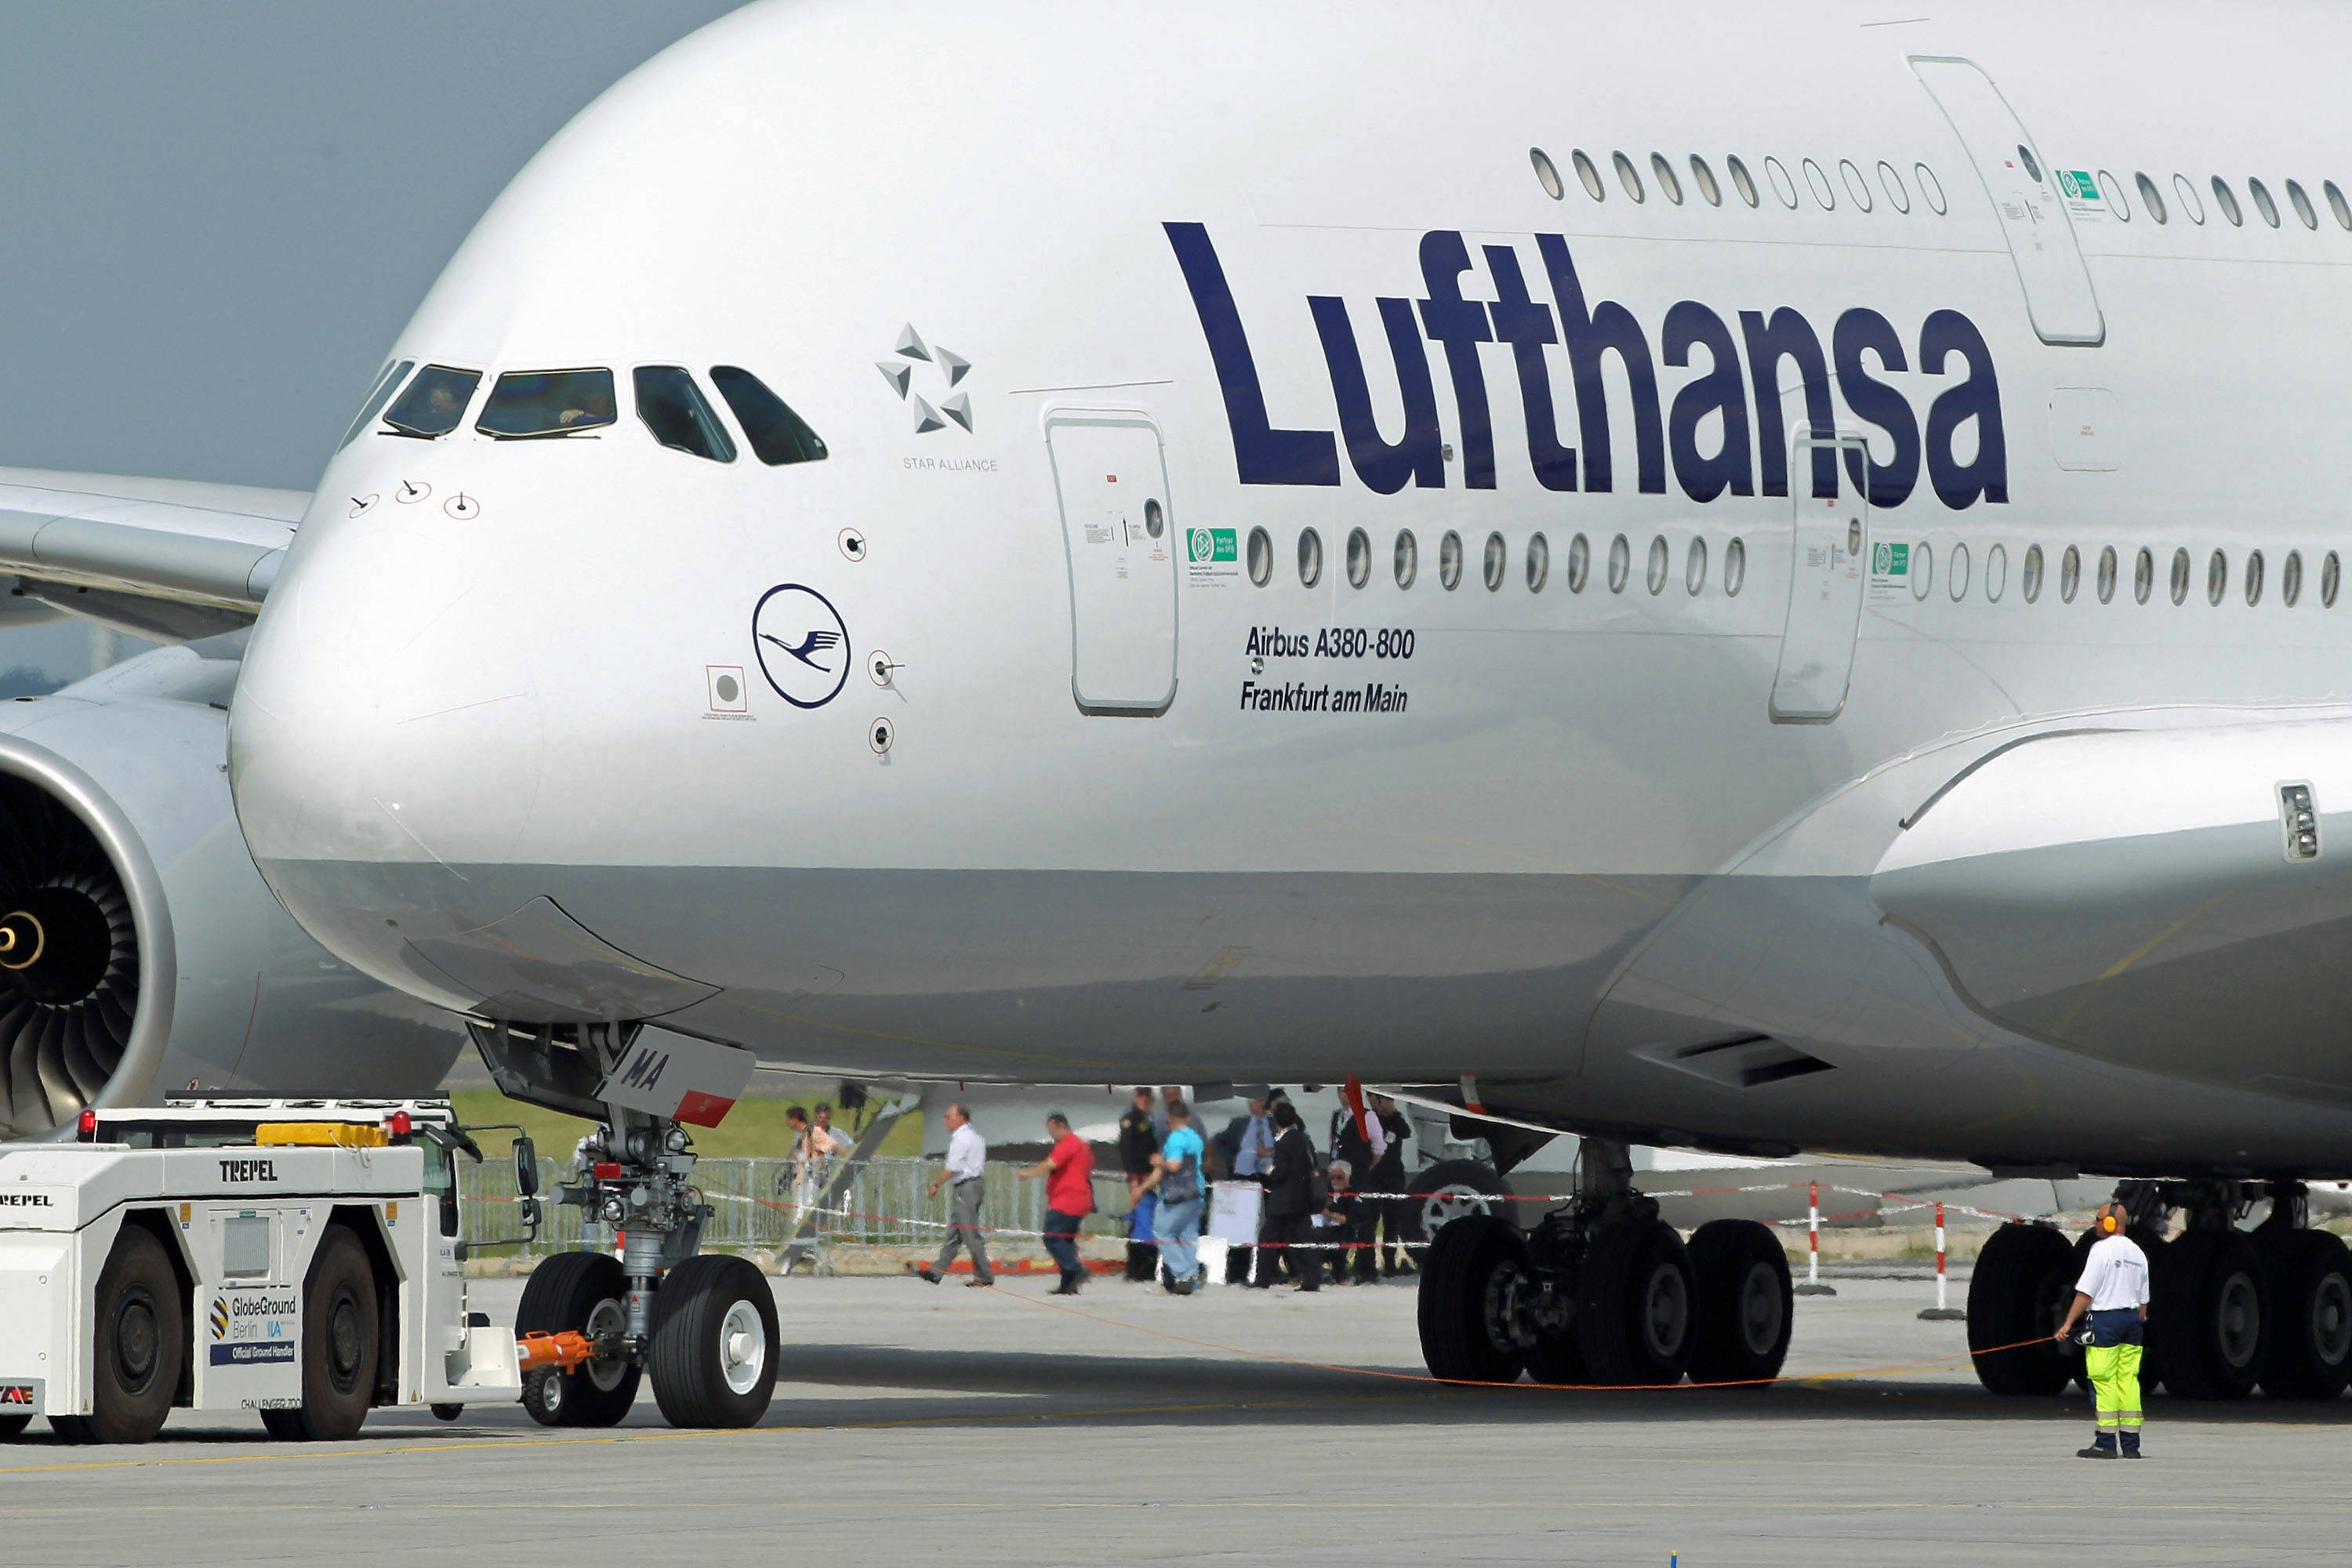 BERLIN - JUNE 08:  A groundcrew member helps guide Lufthansa Airbus A380 passenger plane before take off at the ILA Berlin Air Show on June 8, 2010 in Berlin, Germany. The 2010 ILA will run from June 8-13.  (Photo by Sean Gallup/Getty Images)